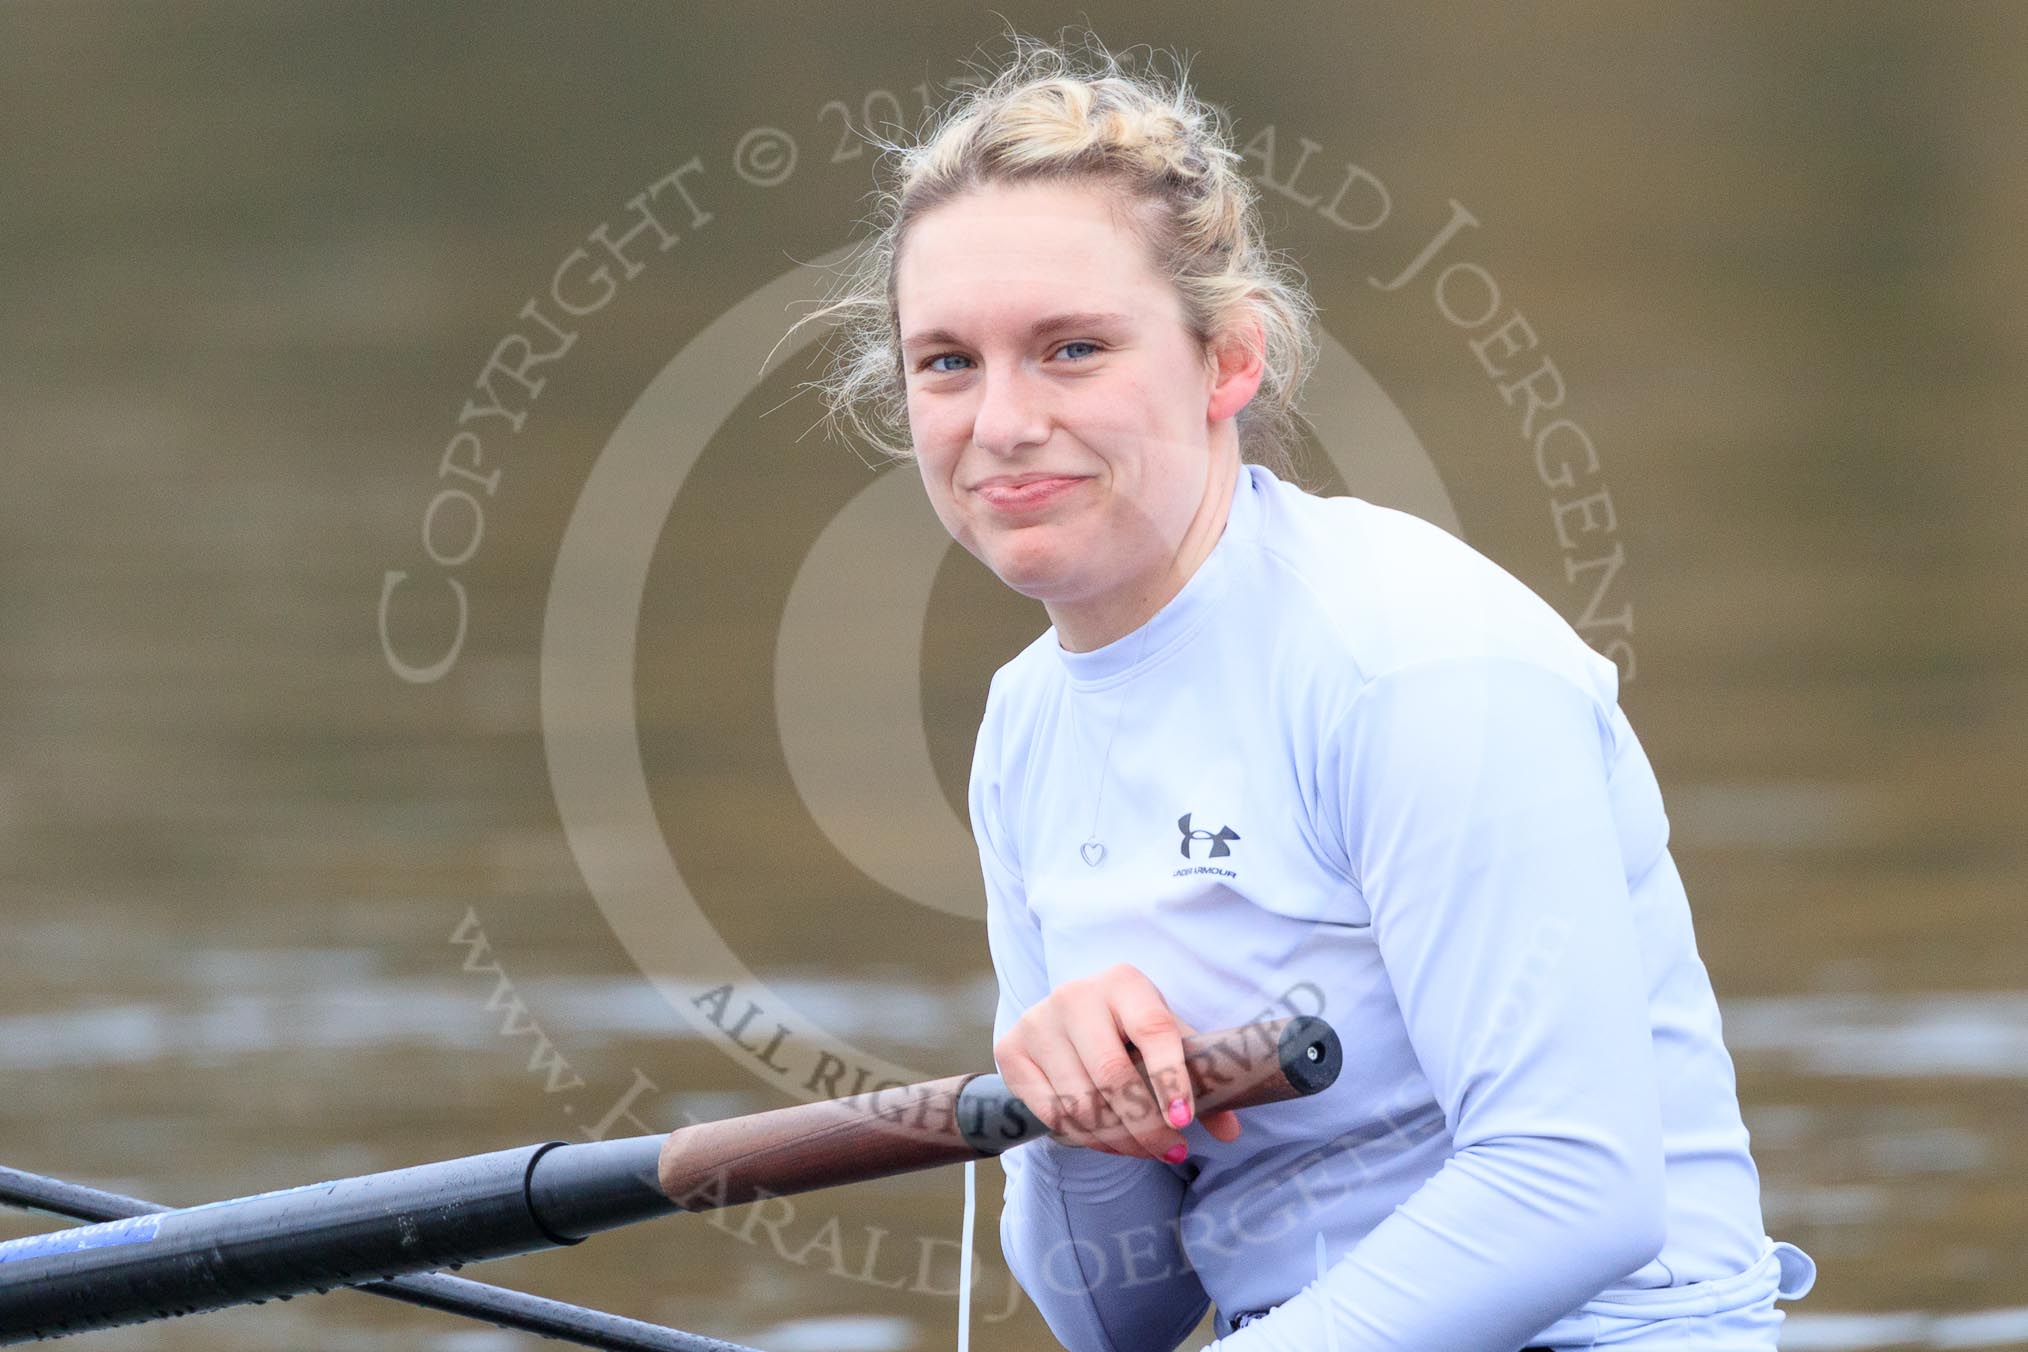 The Women's Boat Race season 2018 - fixture OUWBC vs. Molesey BC: Molesey stroke Katie Bartlett.
River Thames between Putney Bridge and Mortlake,
London SW15,

United Kingdom,
on 04 March 2018 at 13:36, image #38